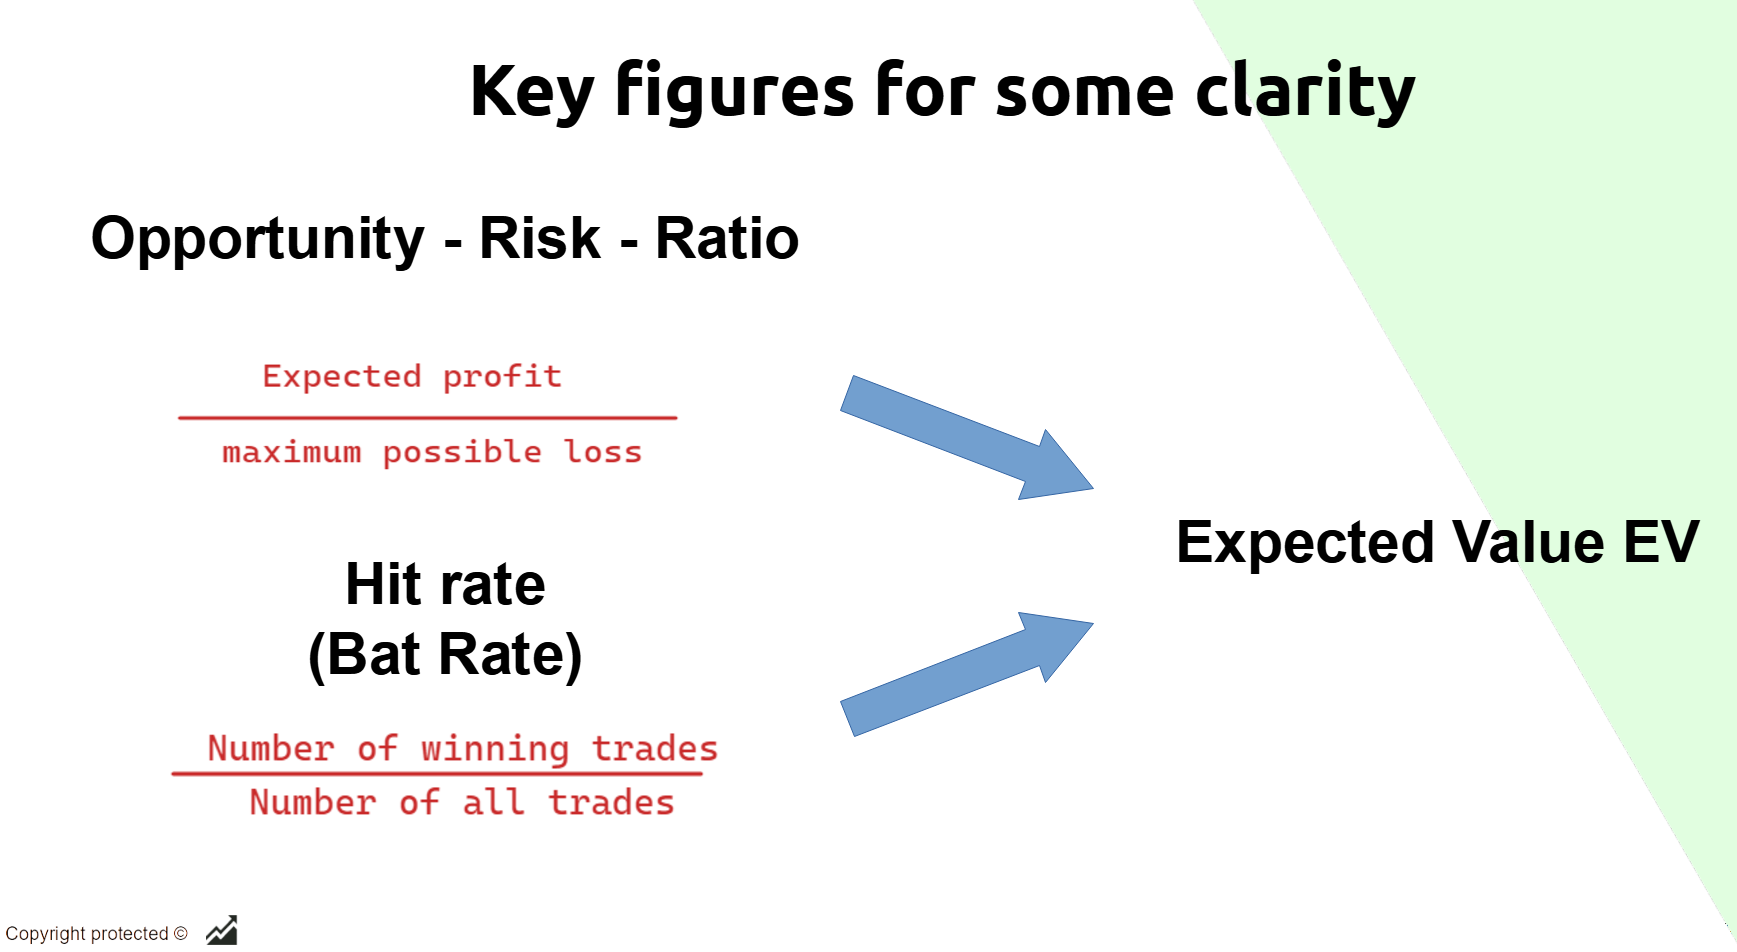 How the Expected Value EV is calculated in trading with Keyfigures